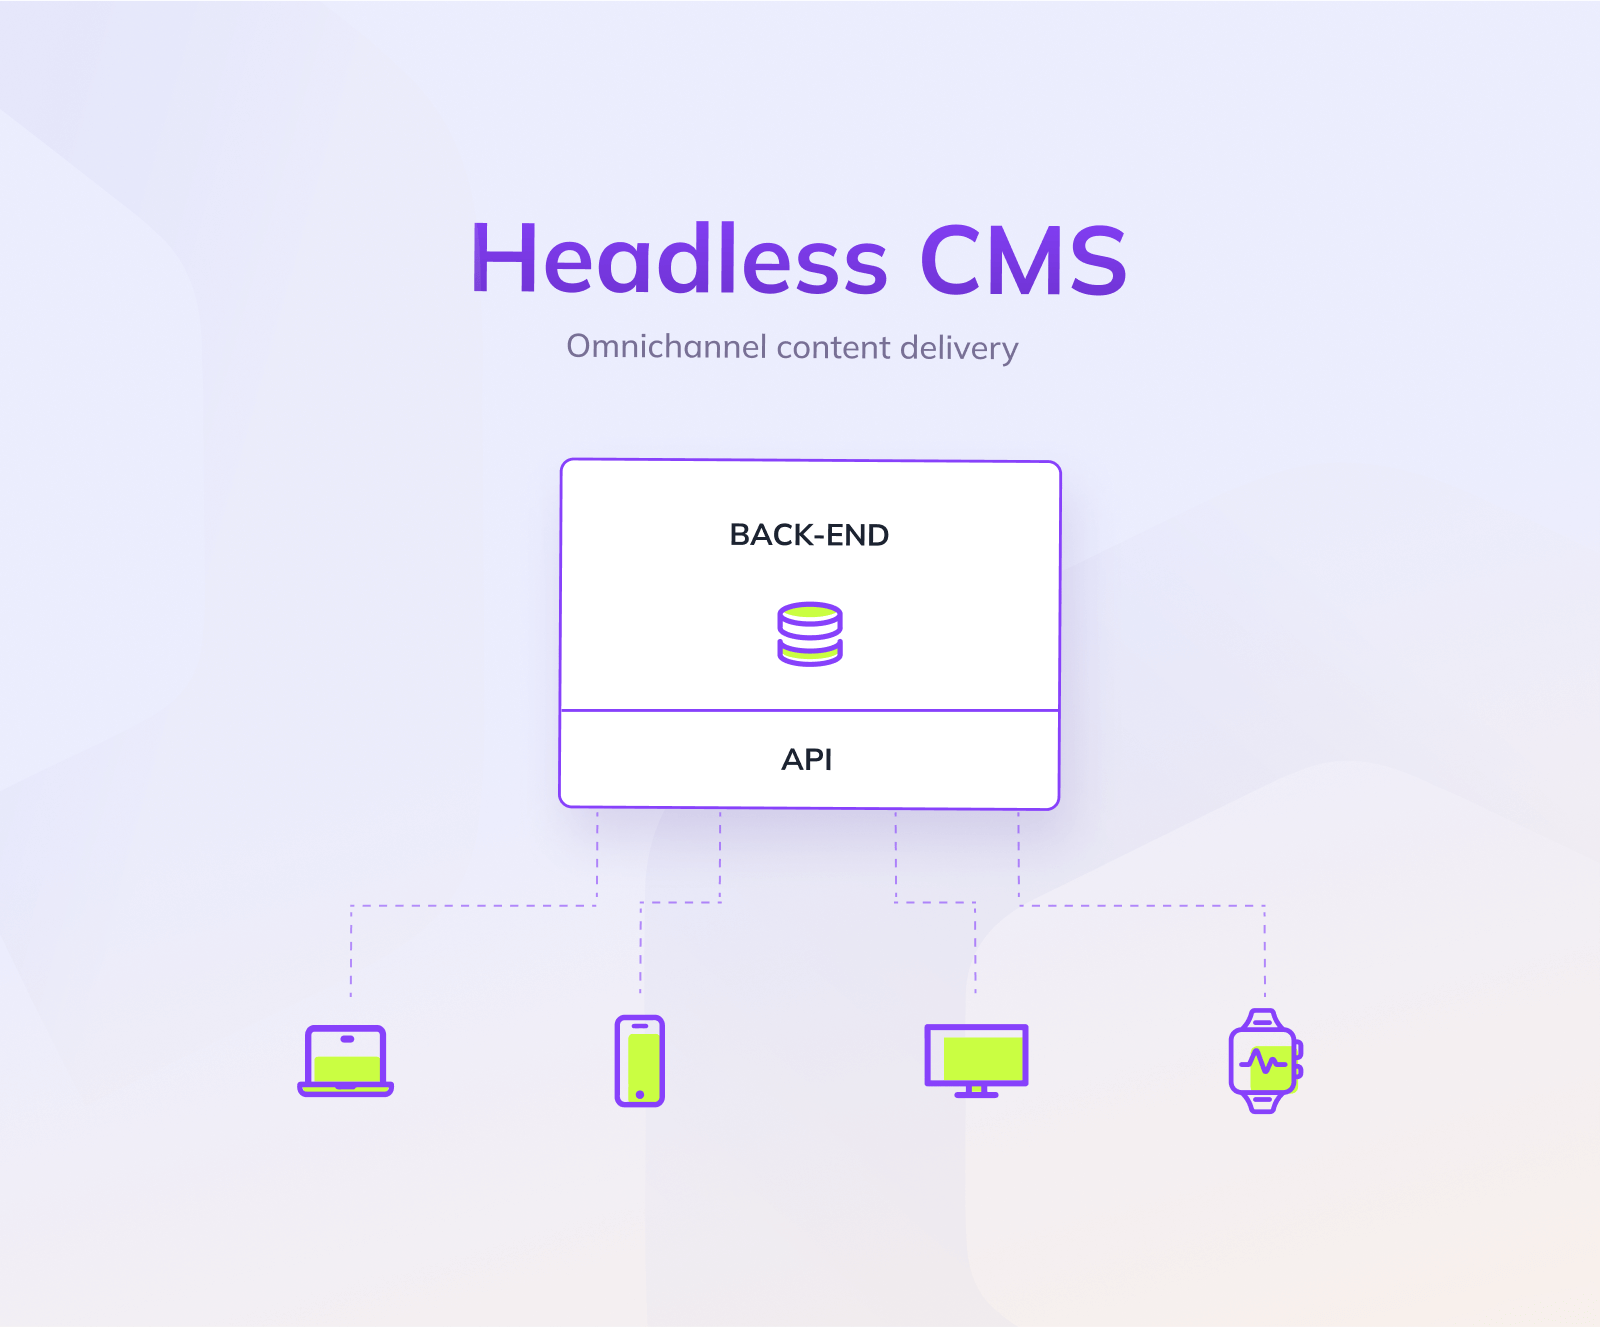 An example solution using a headless CMS and an API serving the same content to multiple channels.